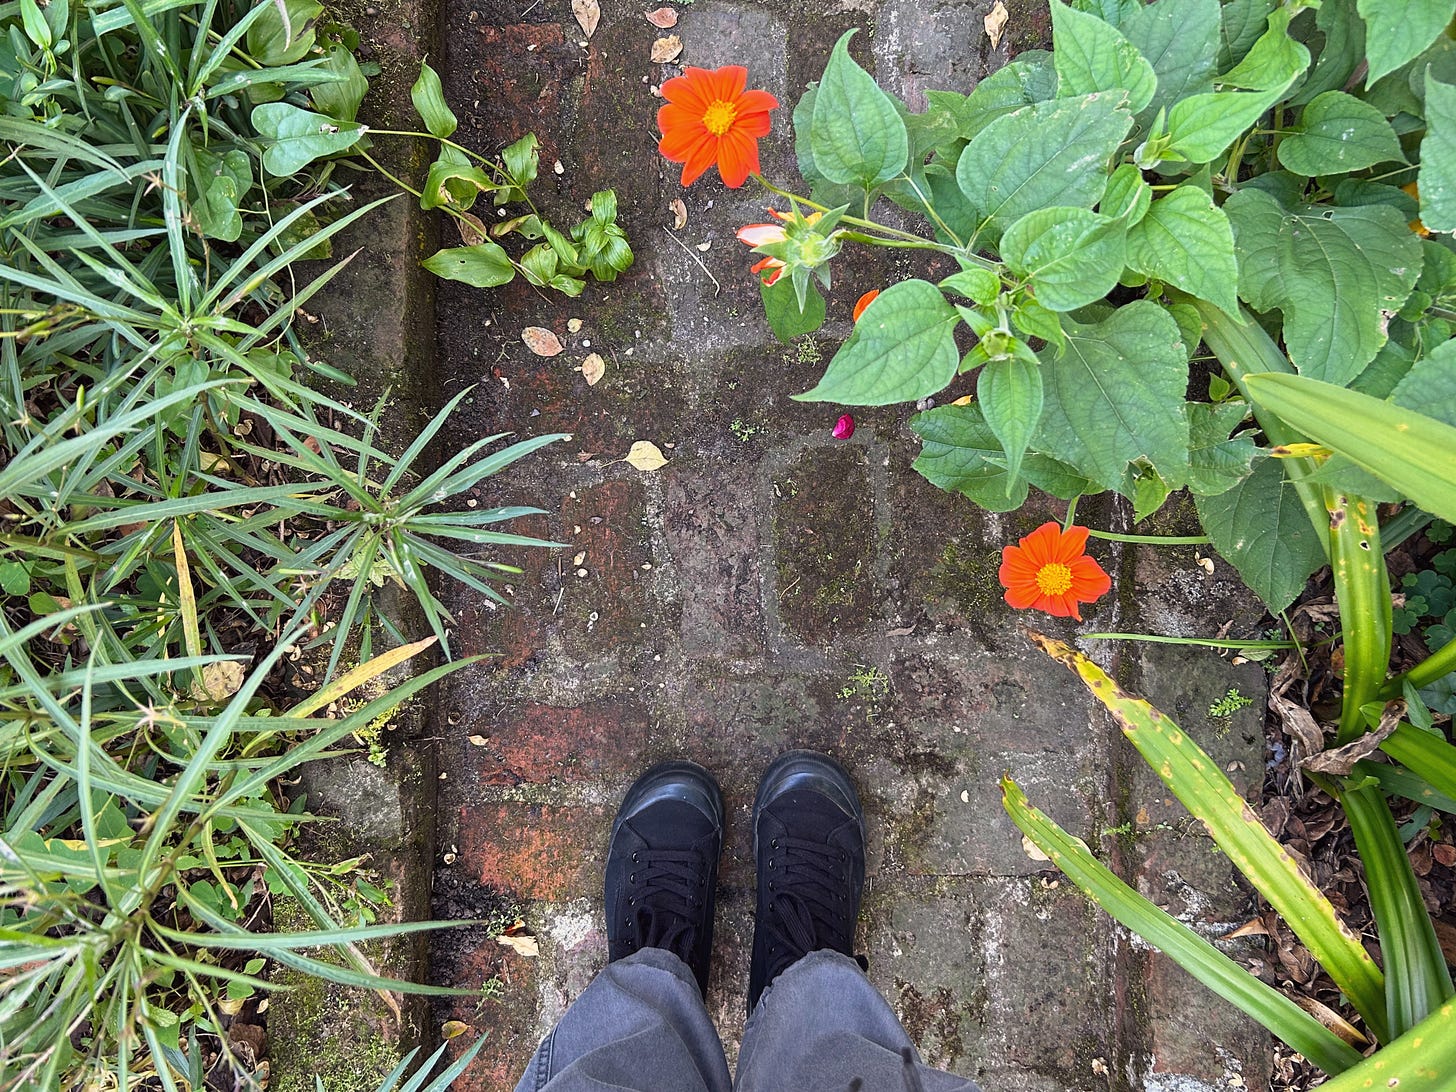 Black converse style shoes stand on mossy bricks. Orange tithonia lean into the walkway framed by green leaves.